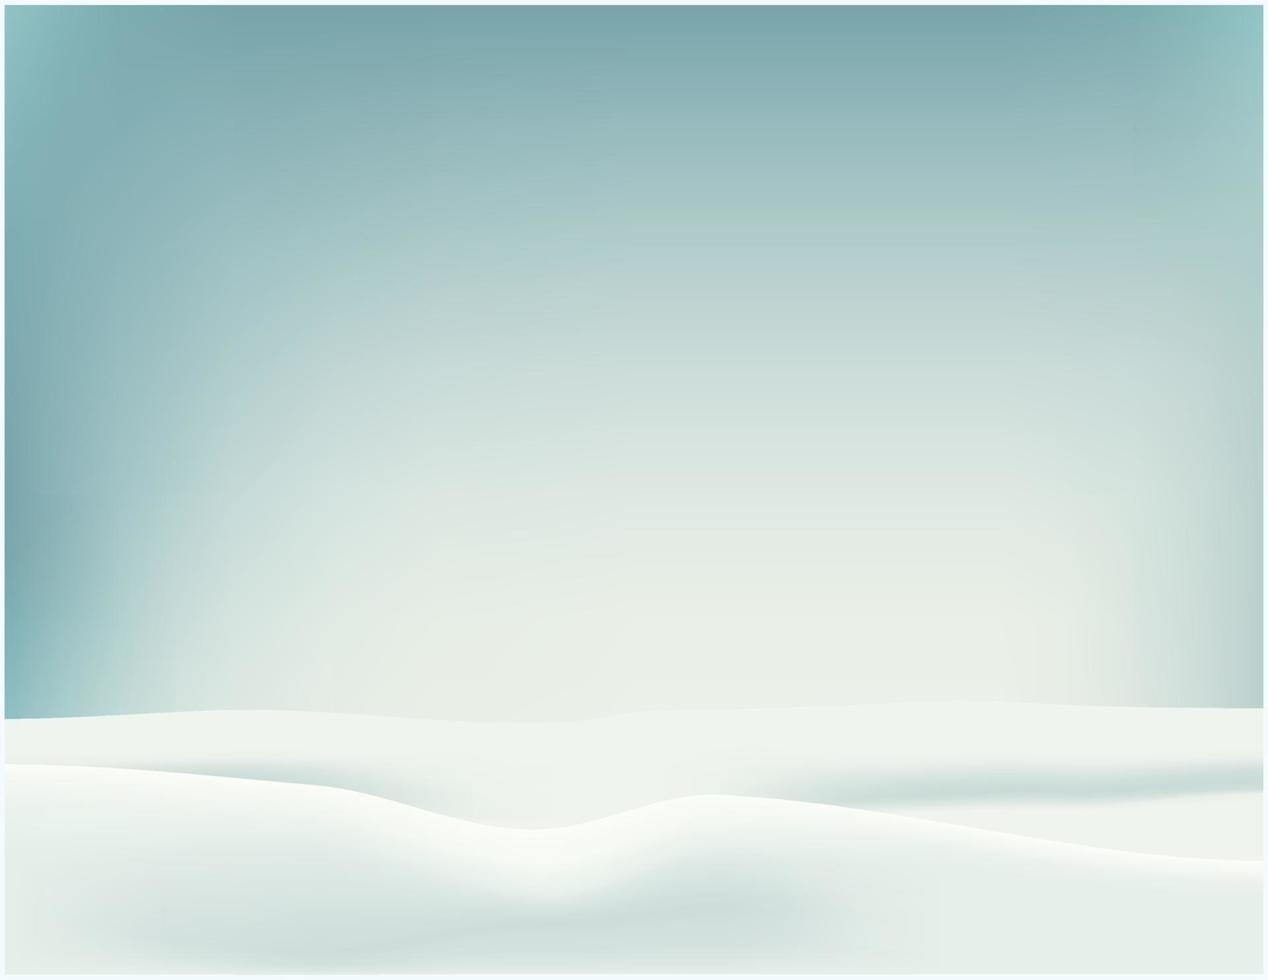 Natural Winter Christmas background with sky, heavy snowfall. background  vector. vector